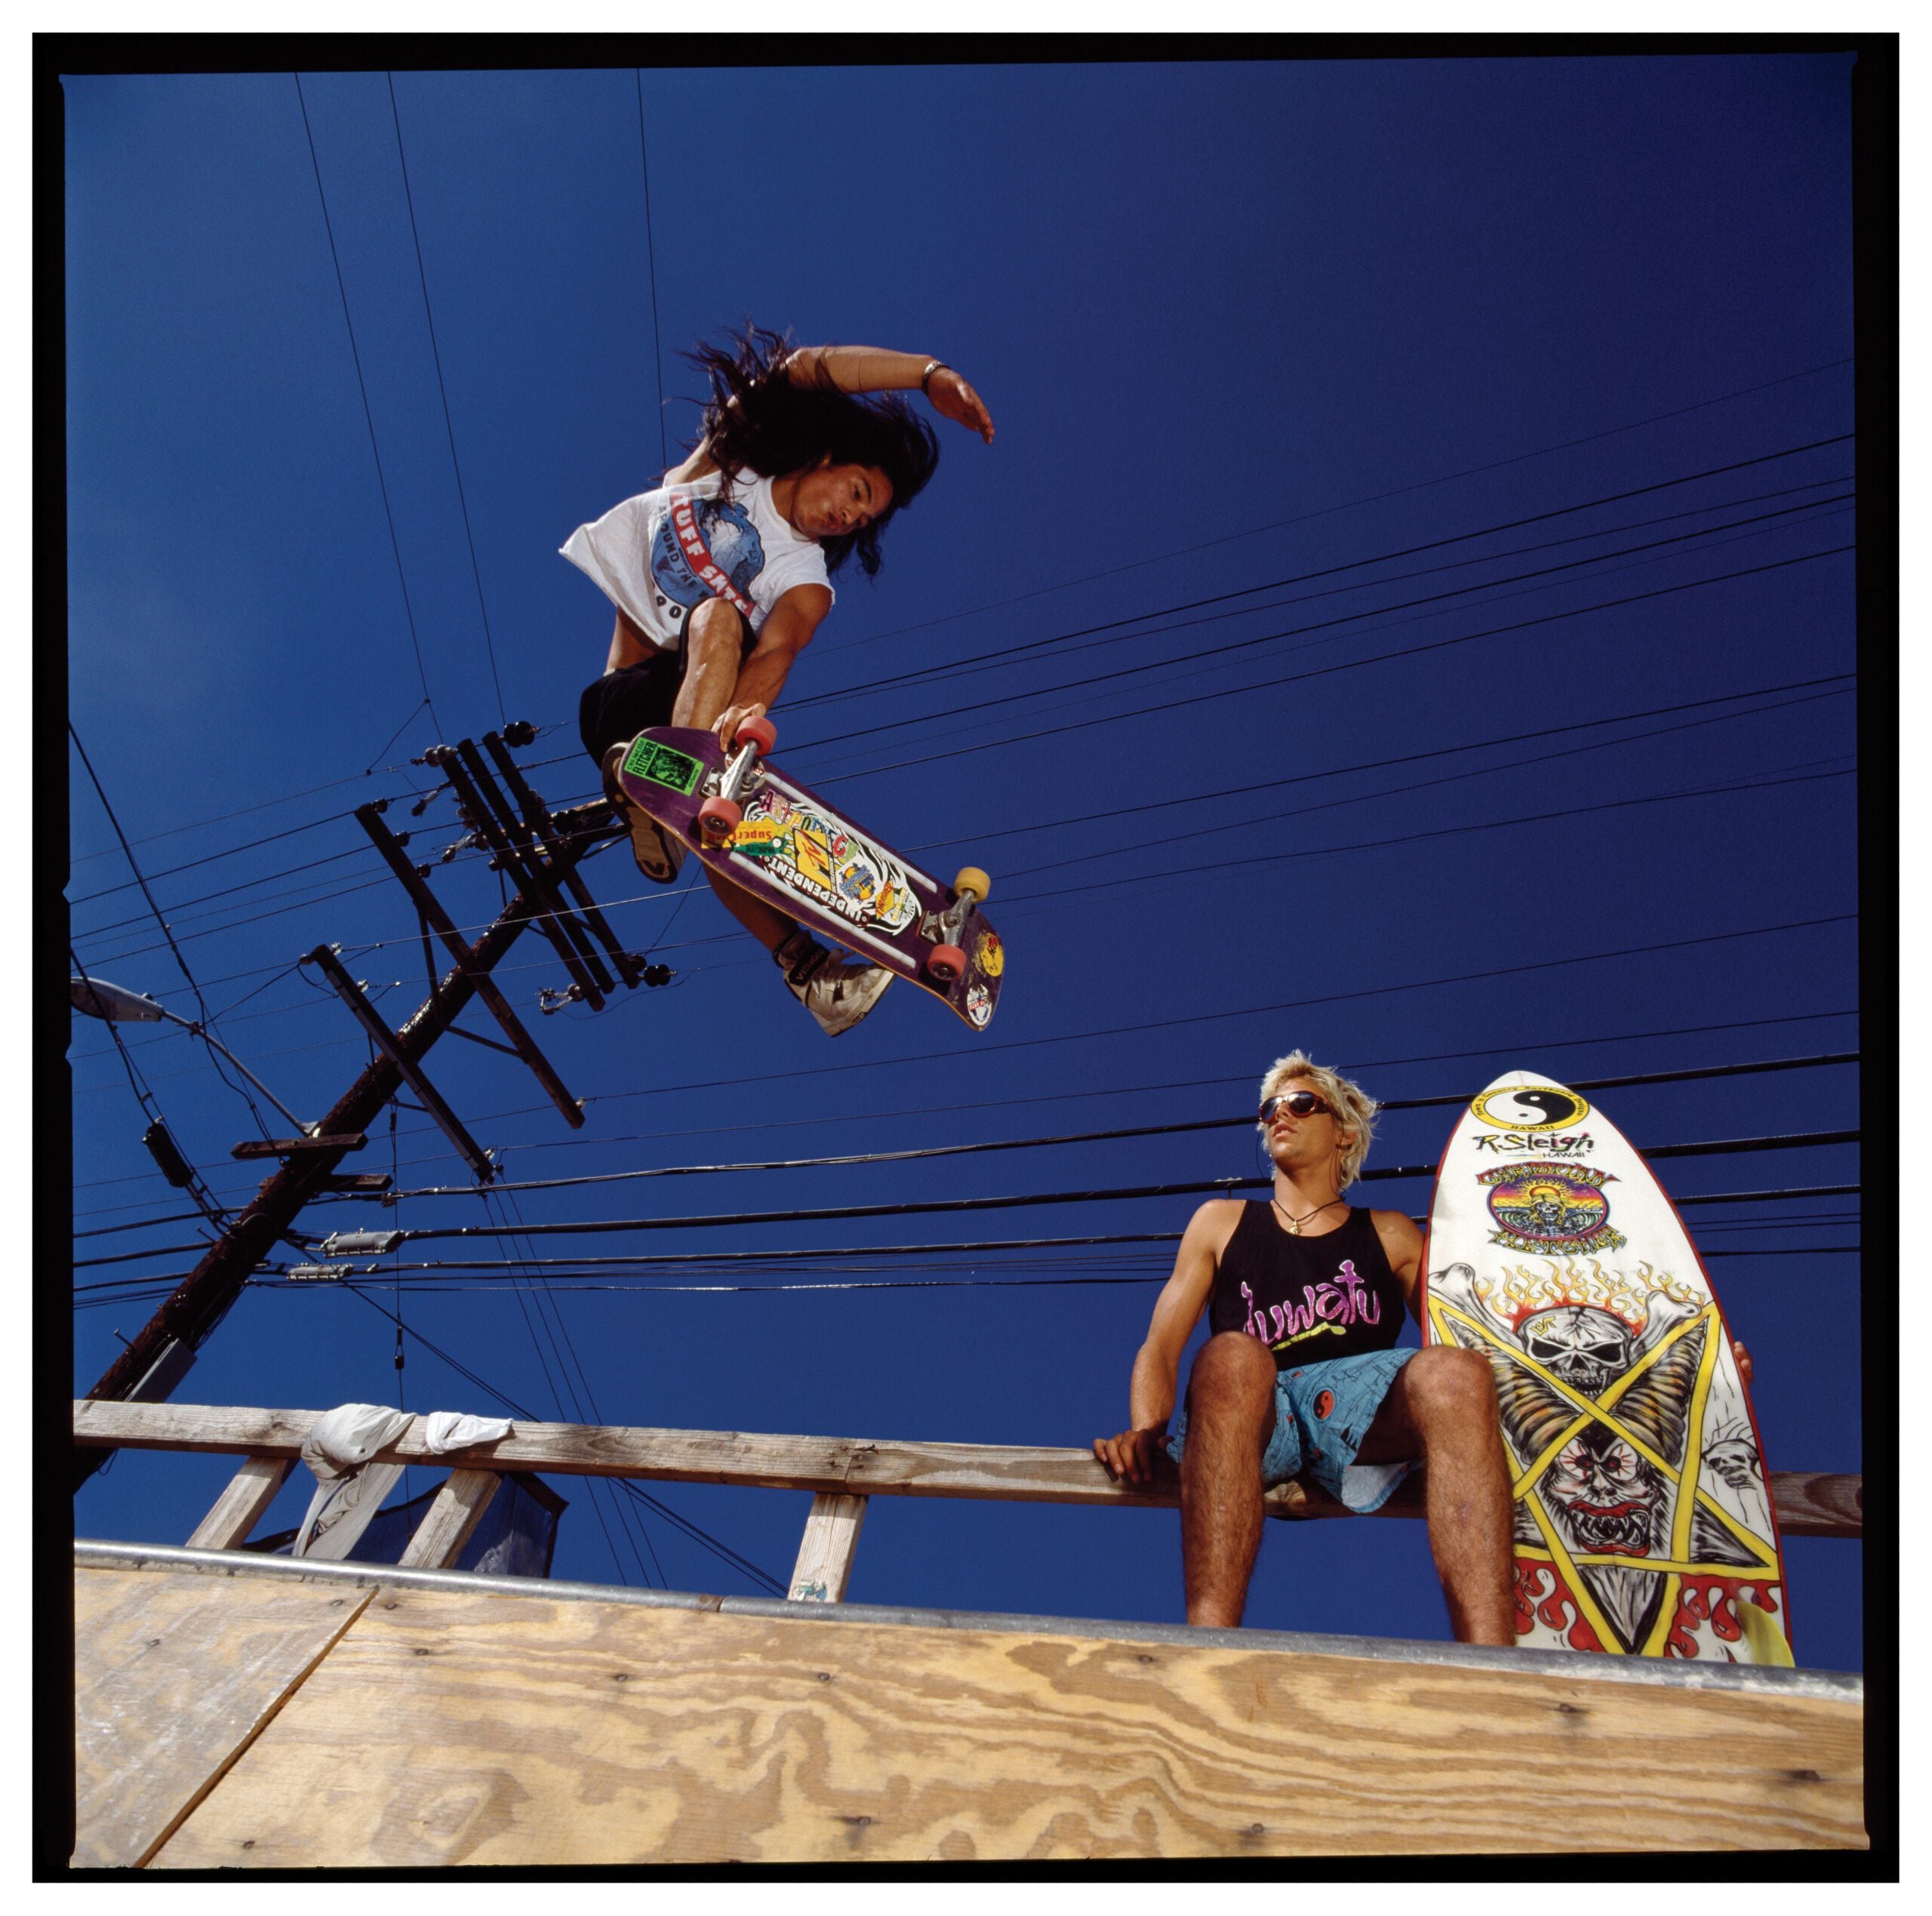 About Christian Hosoi - Pro Skateboarder Profile, Biography and History